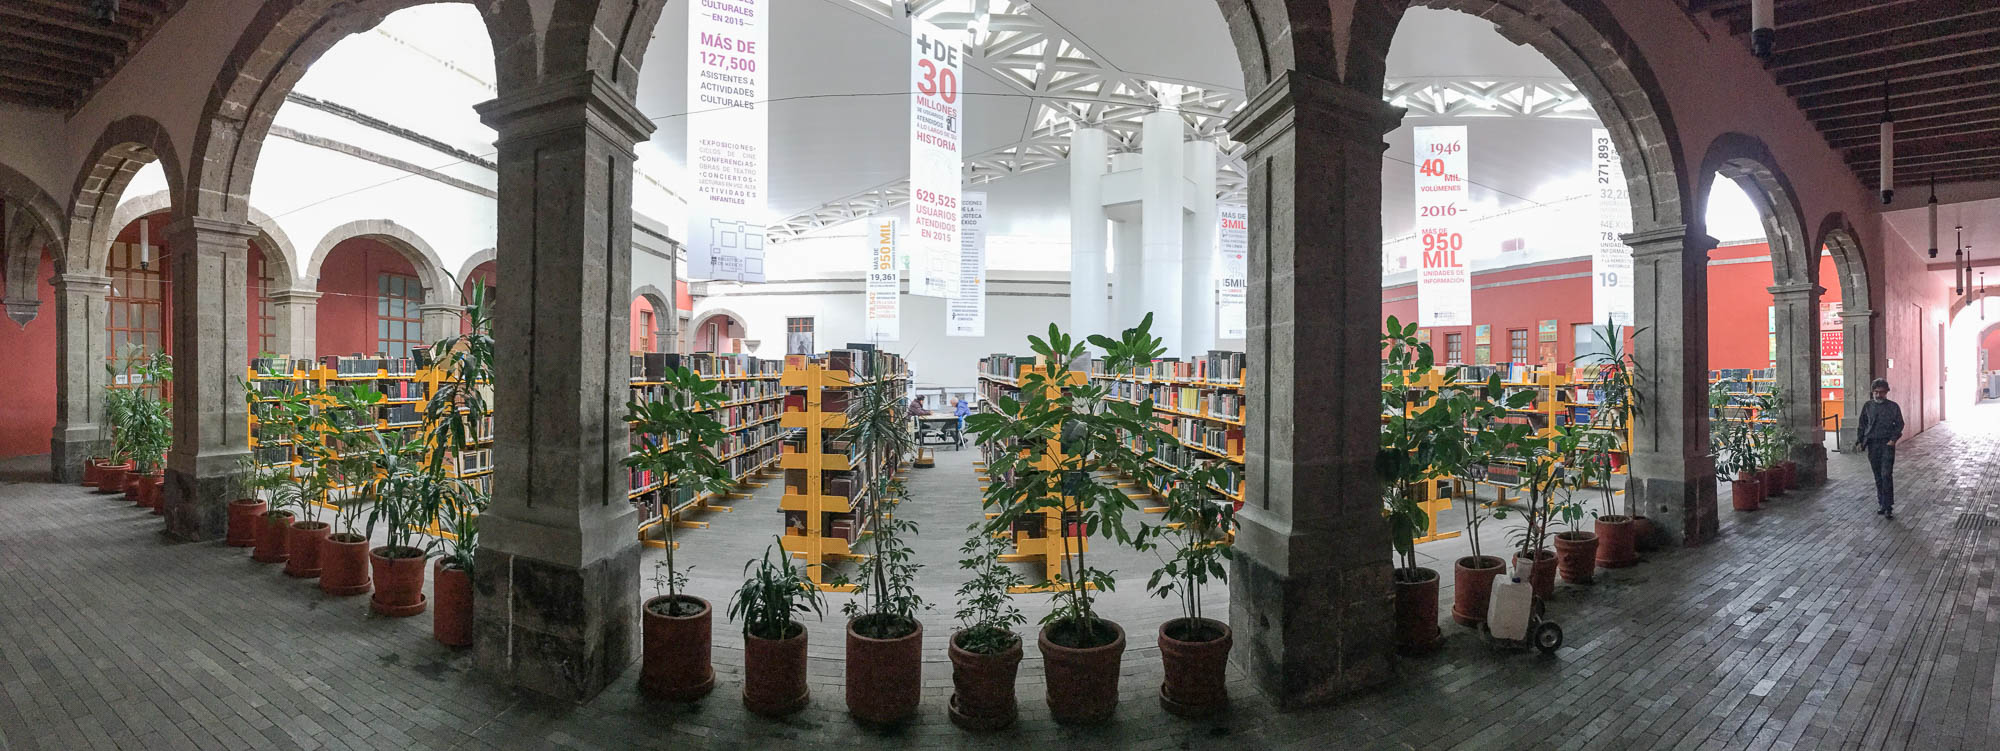 Panoramic shot of a courtyard with bookshelves.